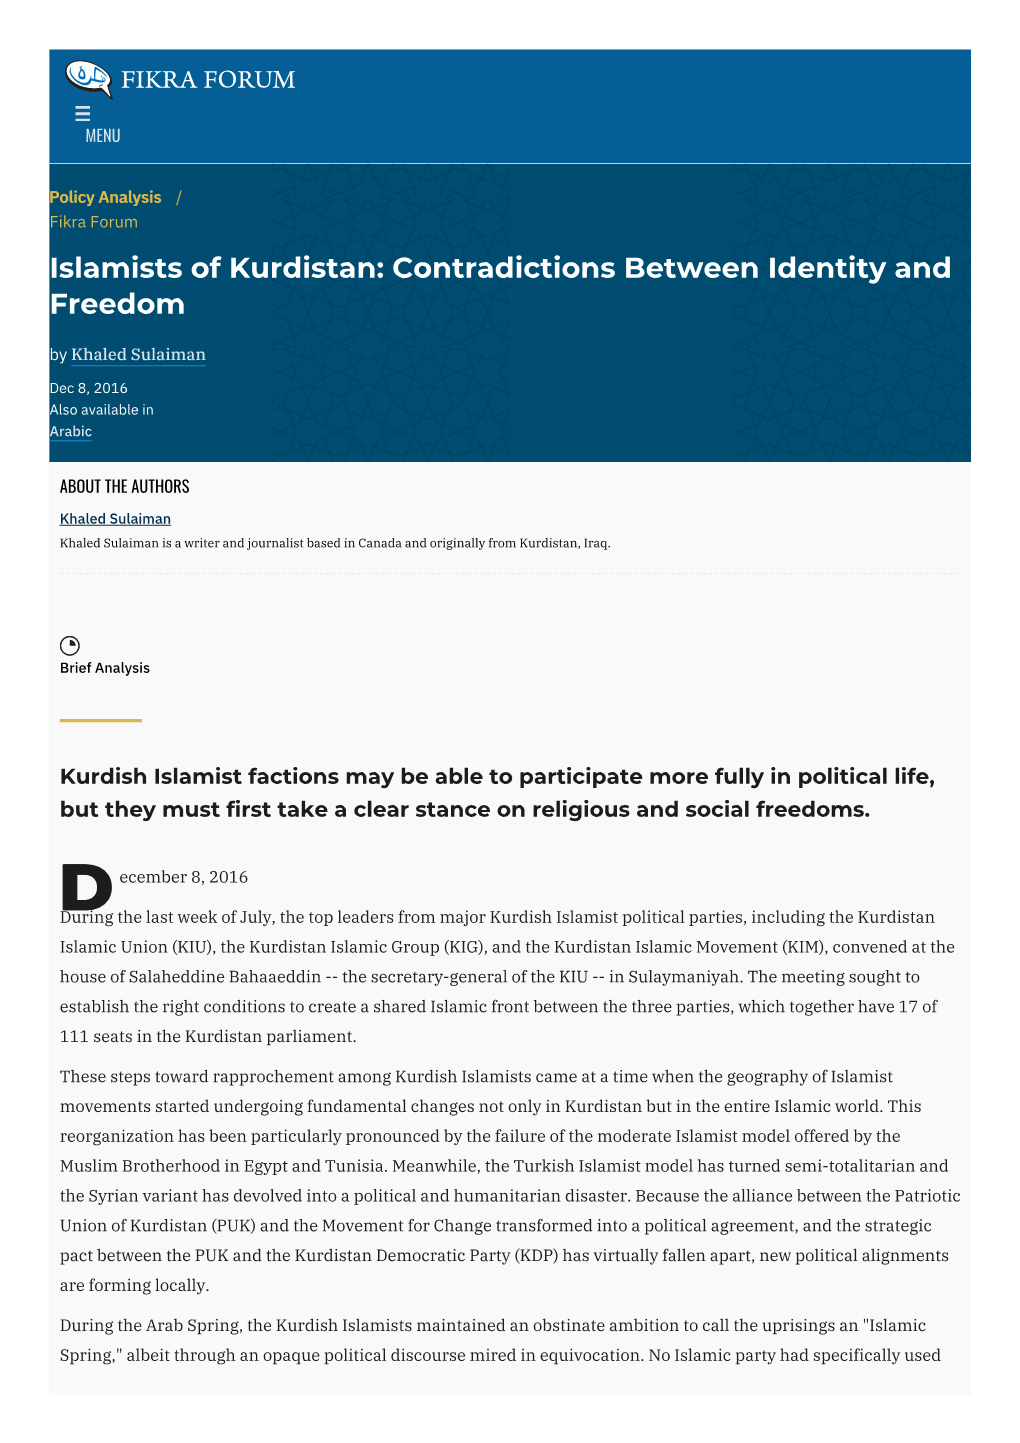 Islamists of Kurdistan: Contradictions Between Identity and Freedom by Khaled Sulaiman